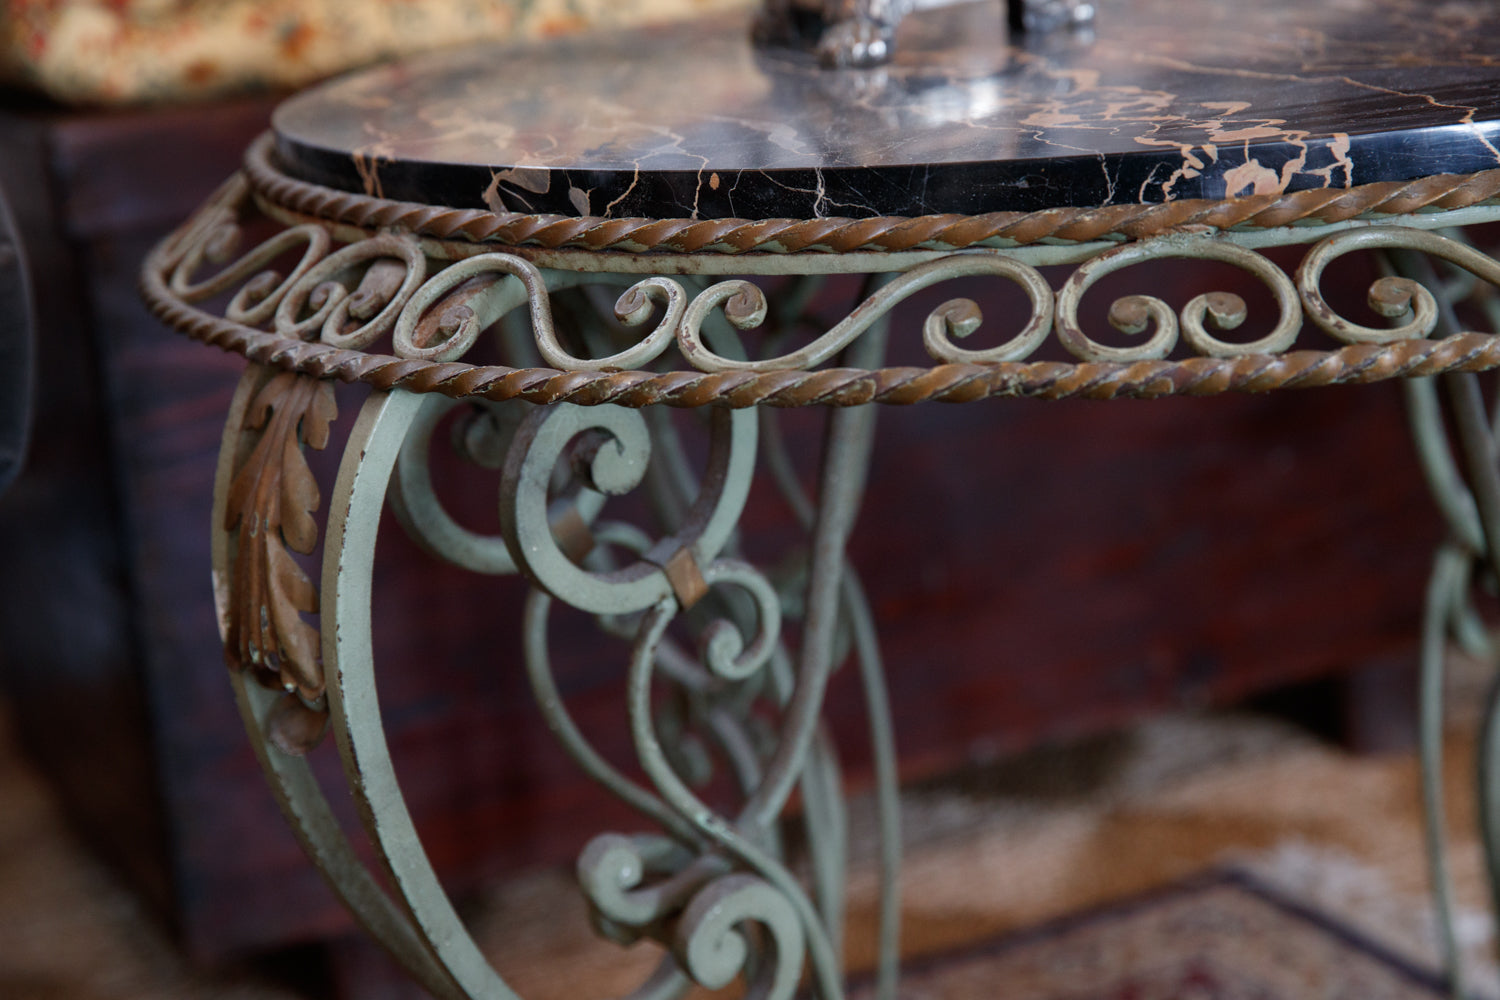 French Wrought Iron & Marble Table